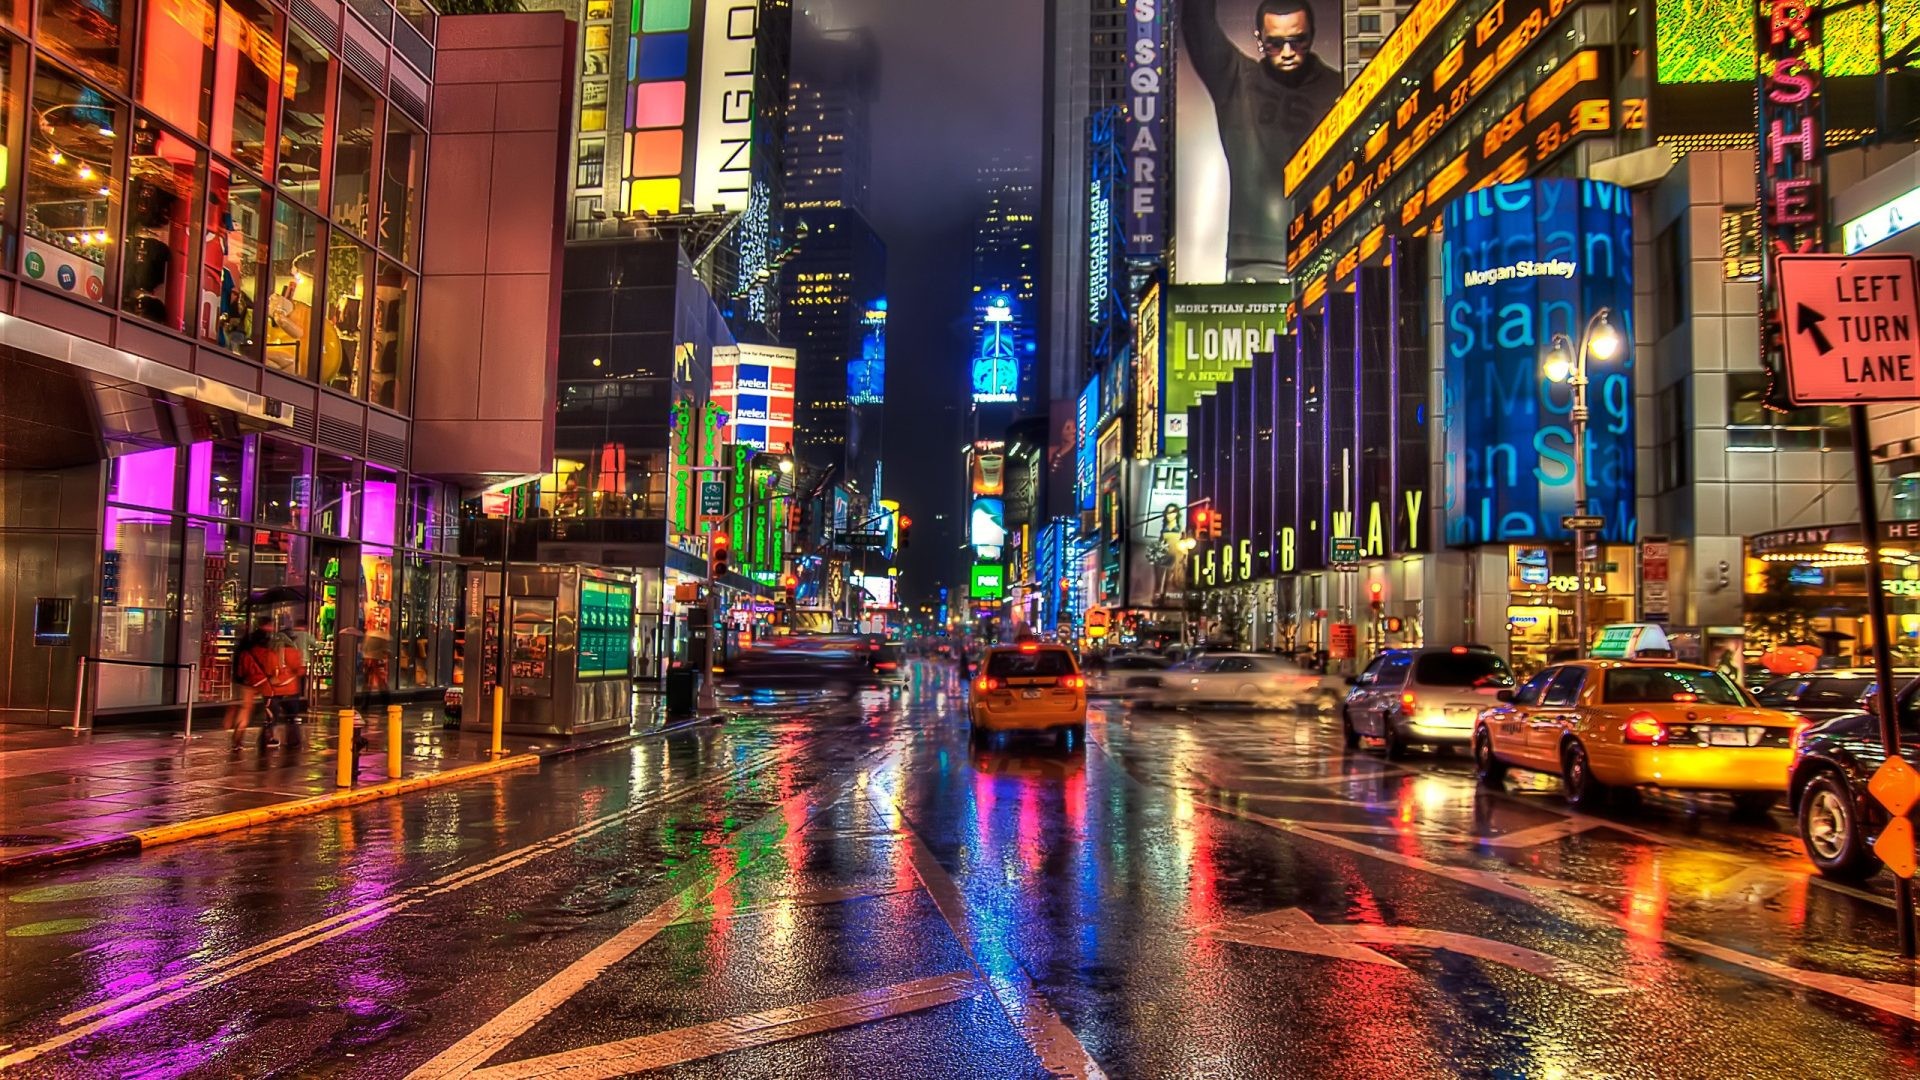 1920x1080 Skyscrapers - New York Colorful Light Peaceful Skyscrapers Walk Building  Lights Night Alley Road Sky Colors